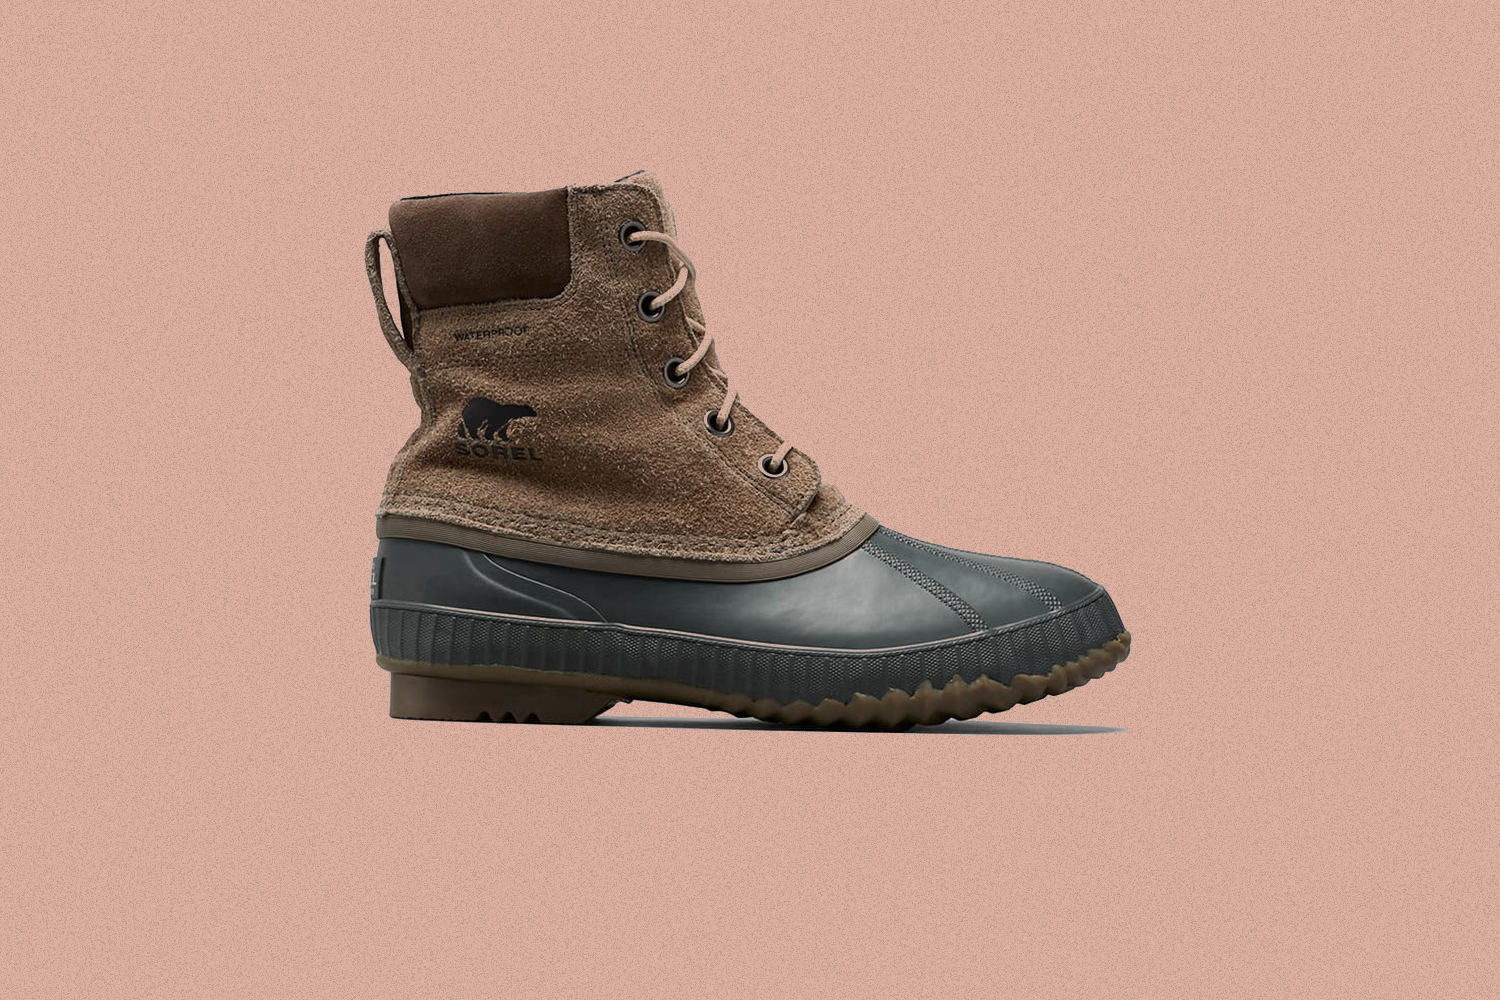 cheapest place to buy sorel boots